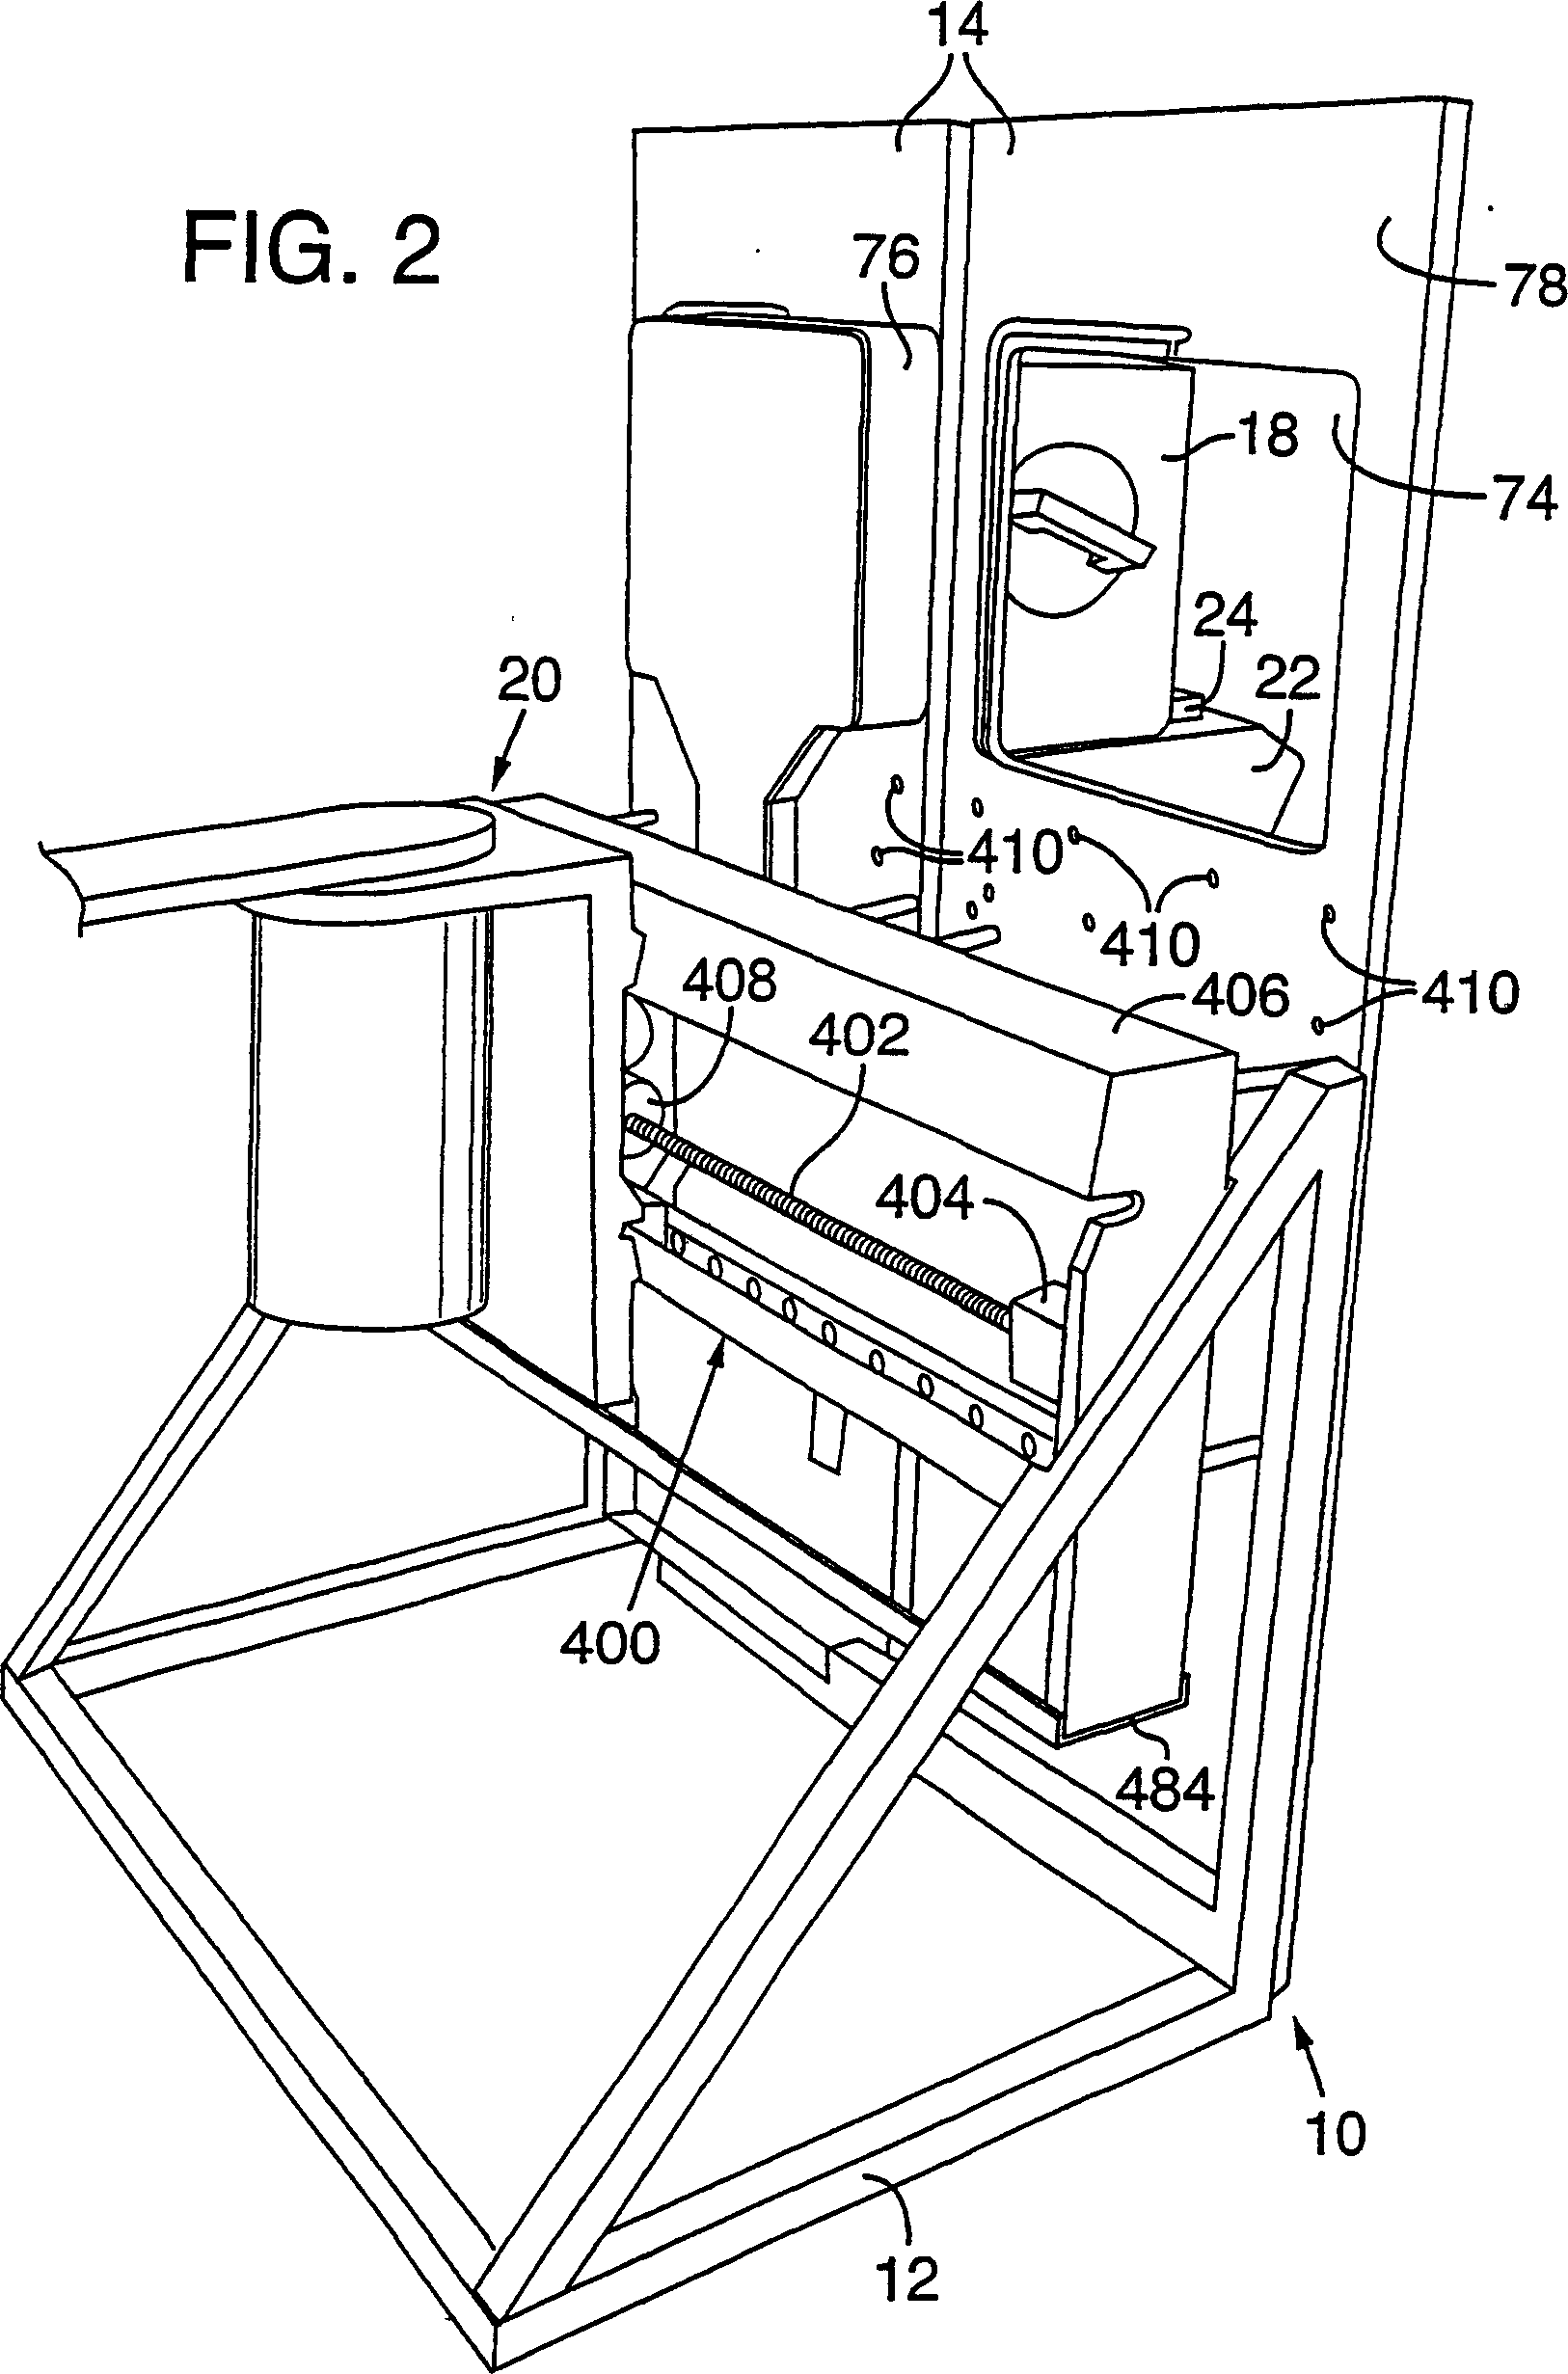 Pod load interface equipment adapted for implementation in a fims system